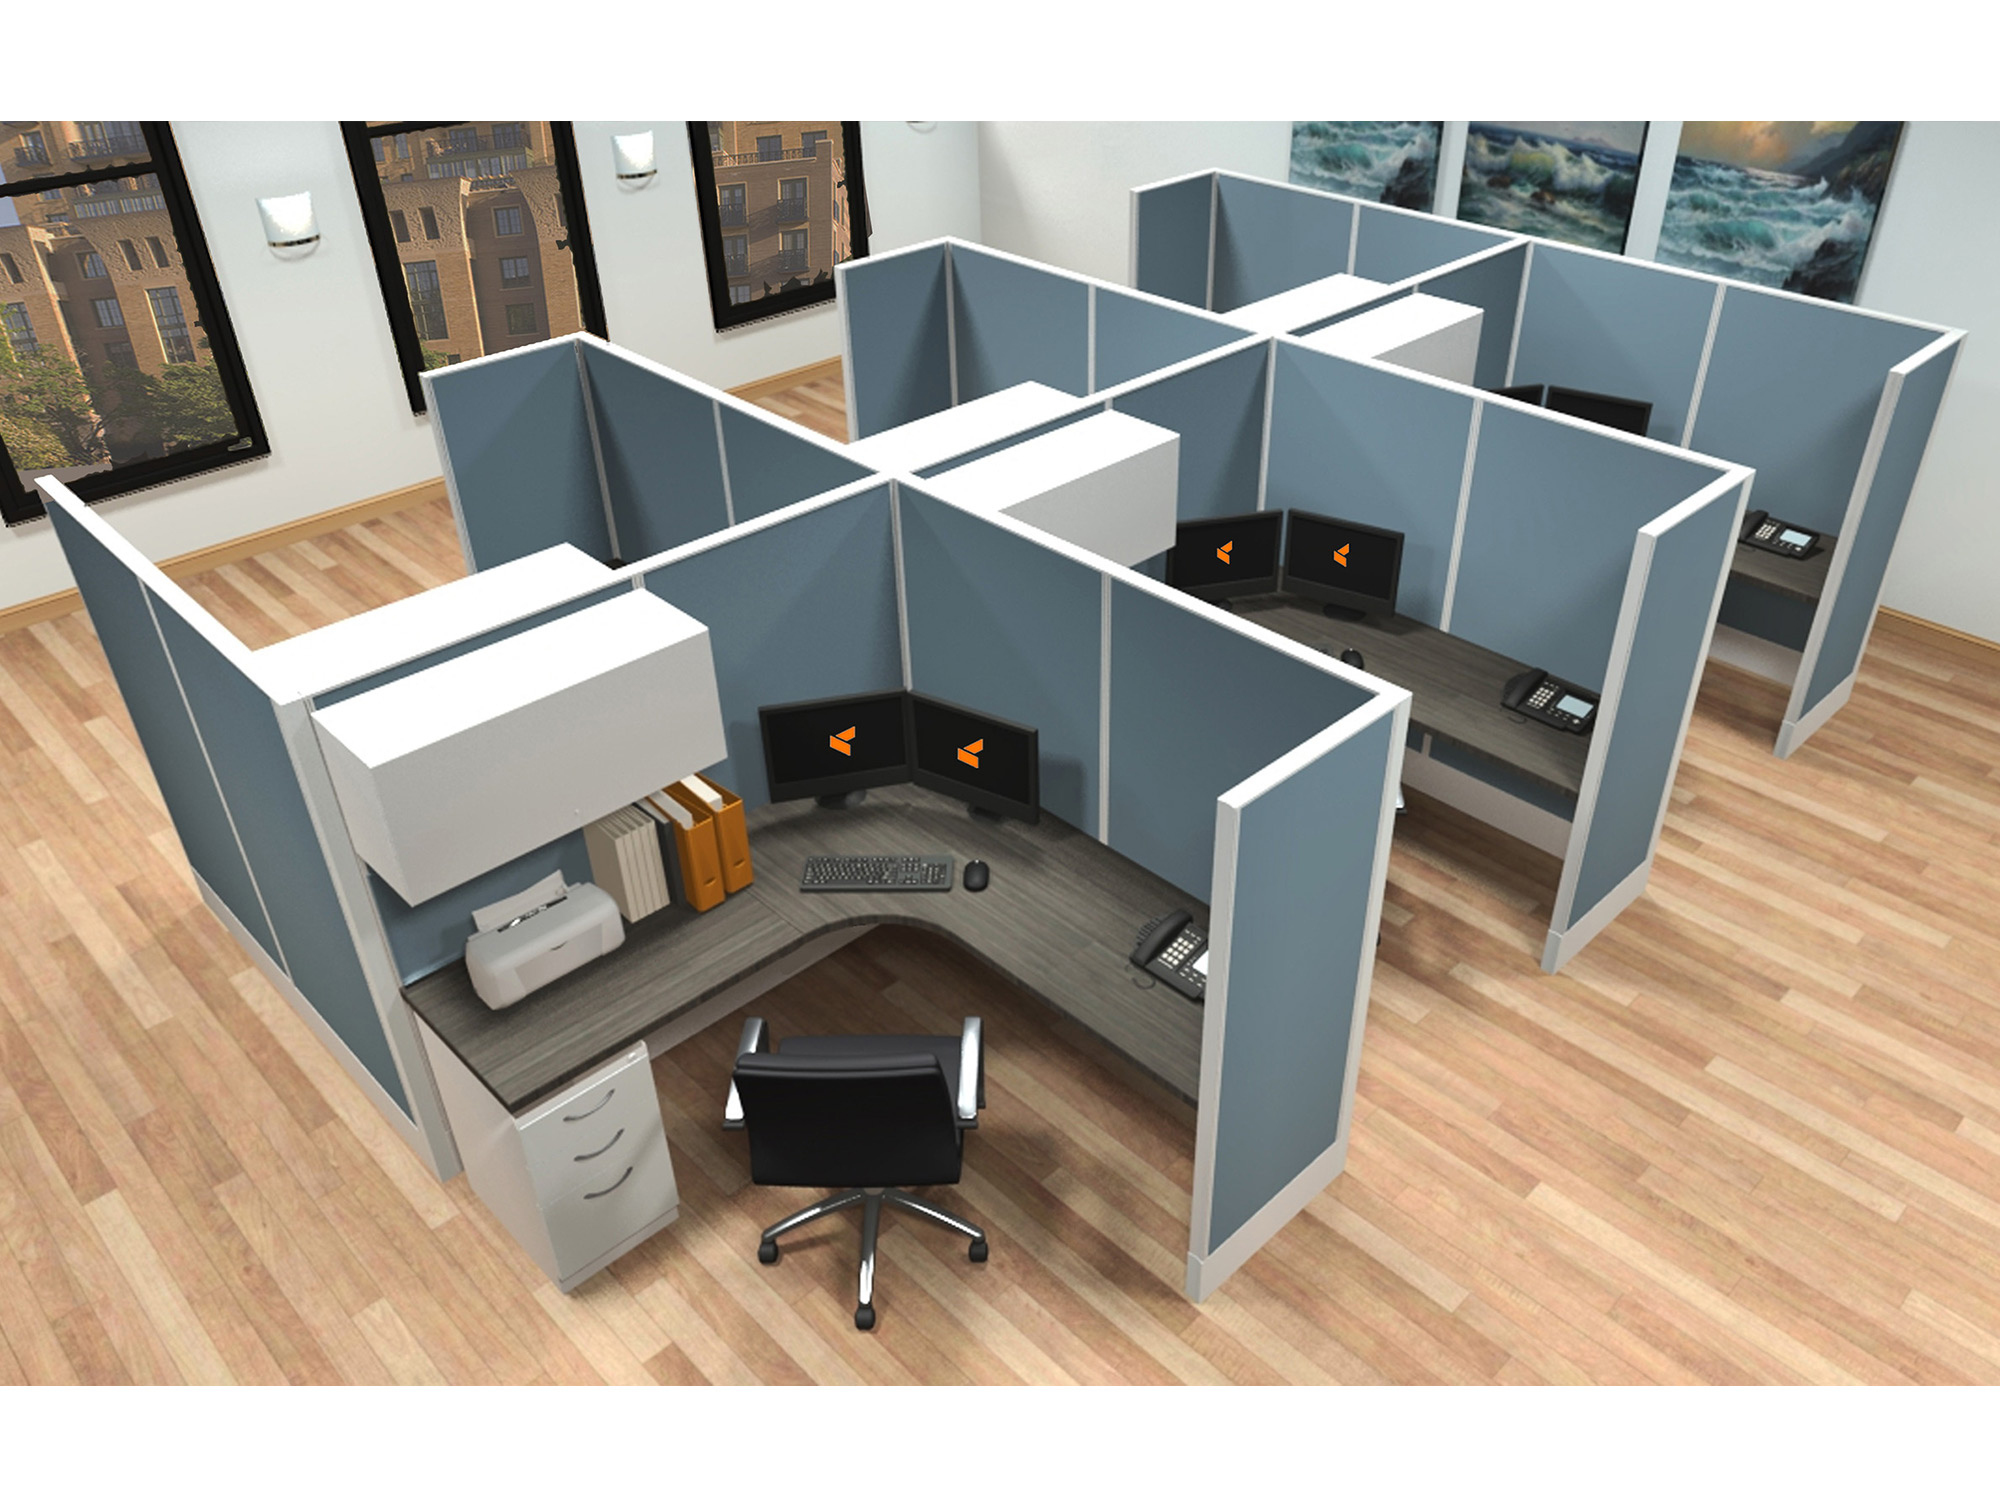 6x6 modular workstations from AIS - 6 Pack Cluster